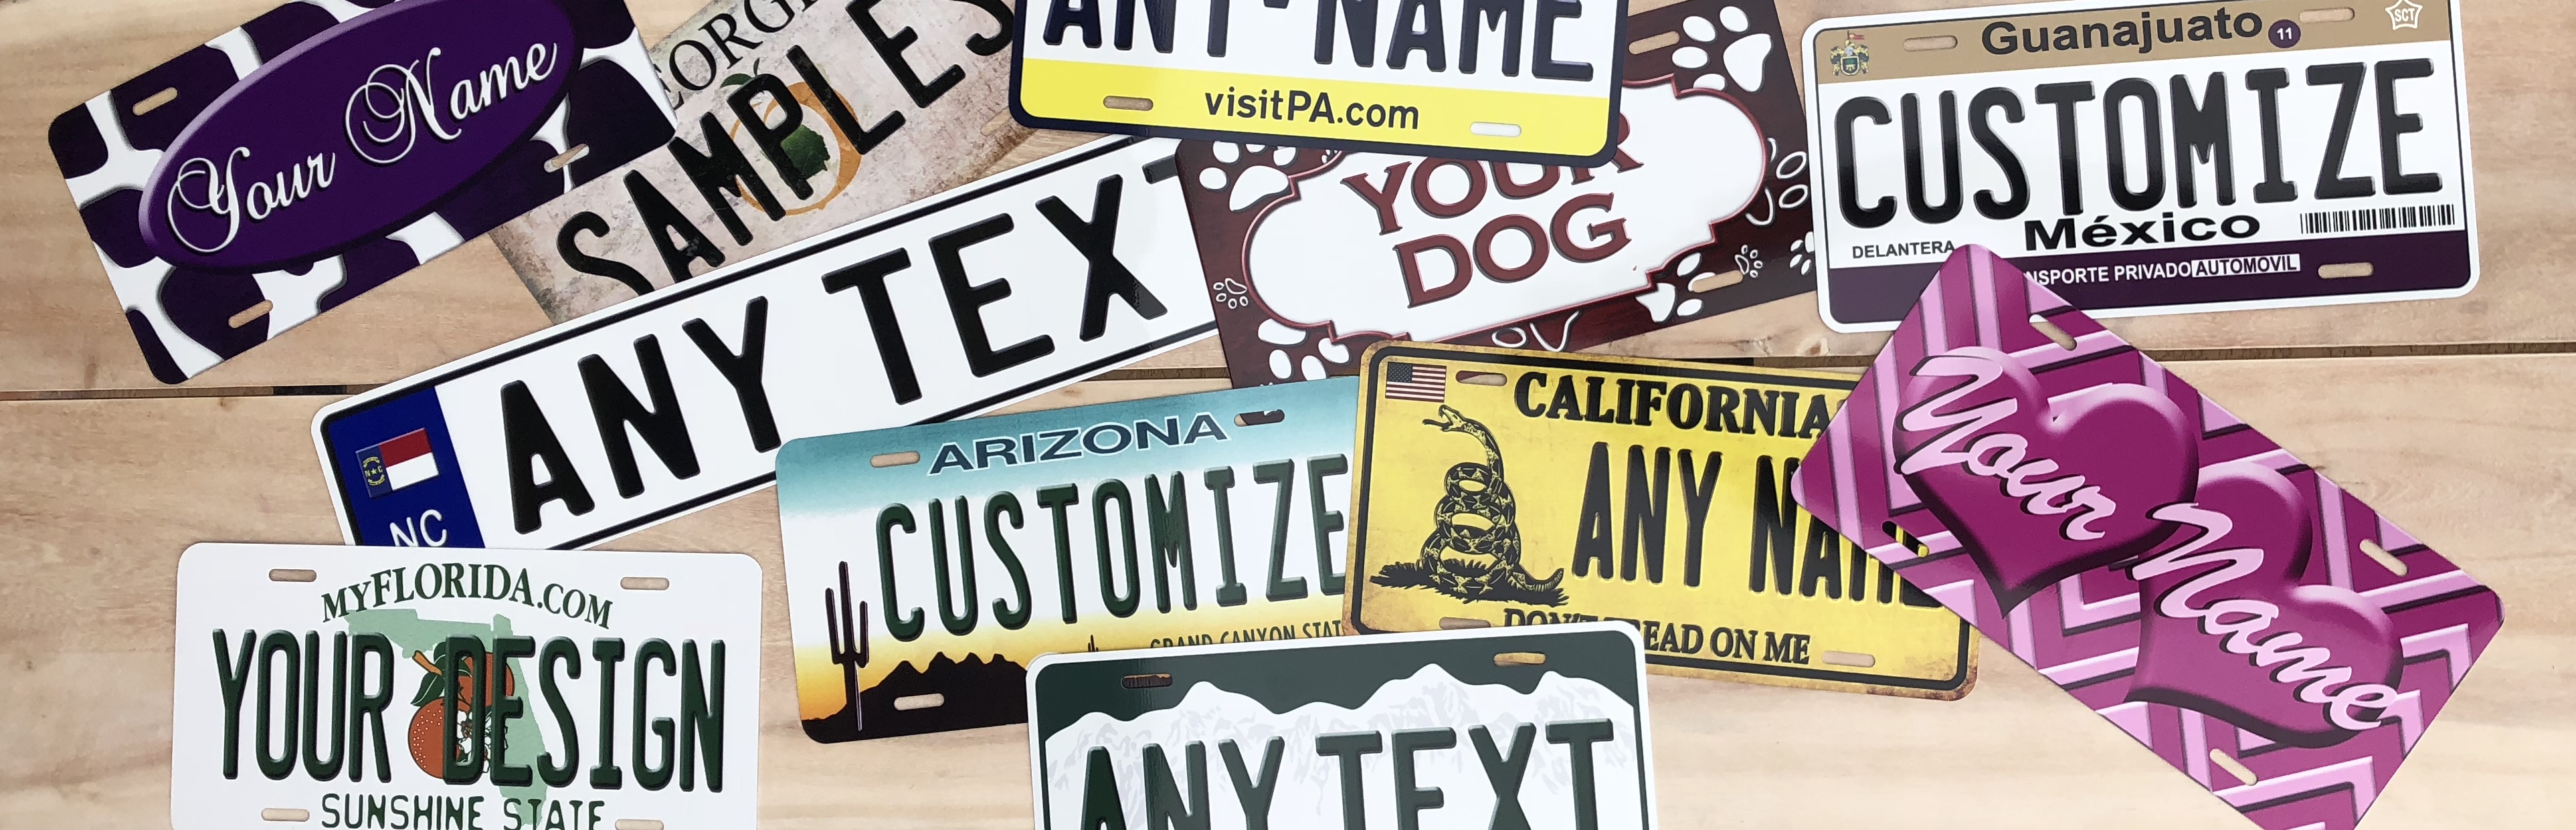 Own Custom License Plate Tag and Signs